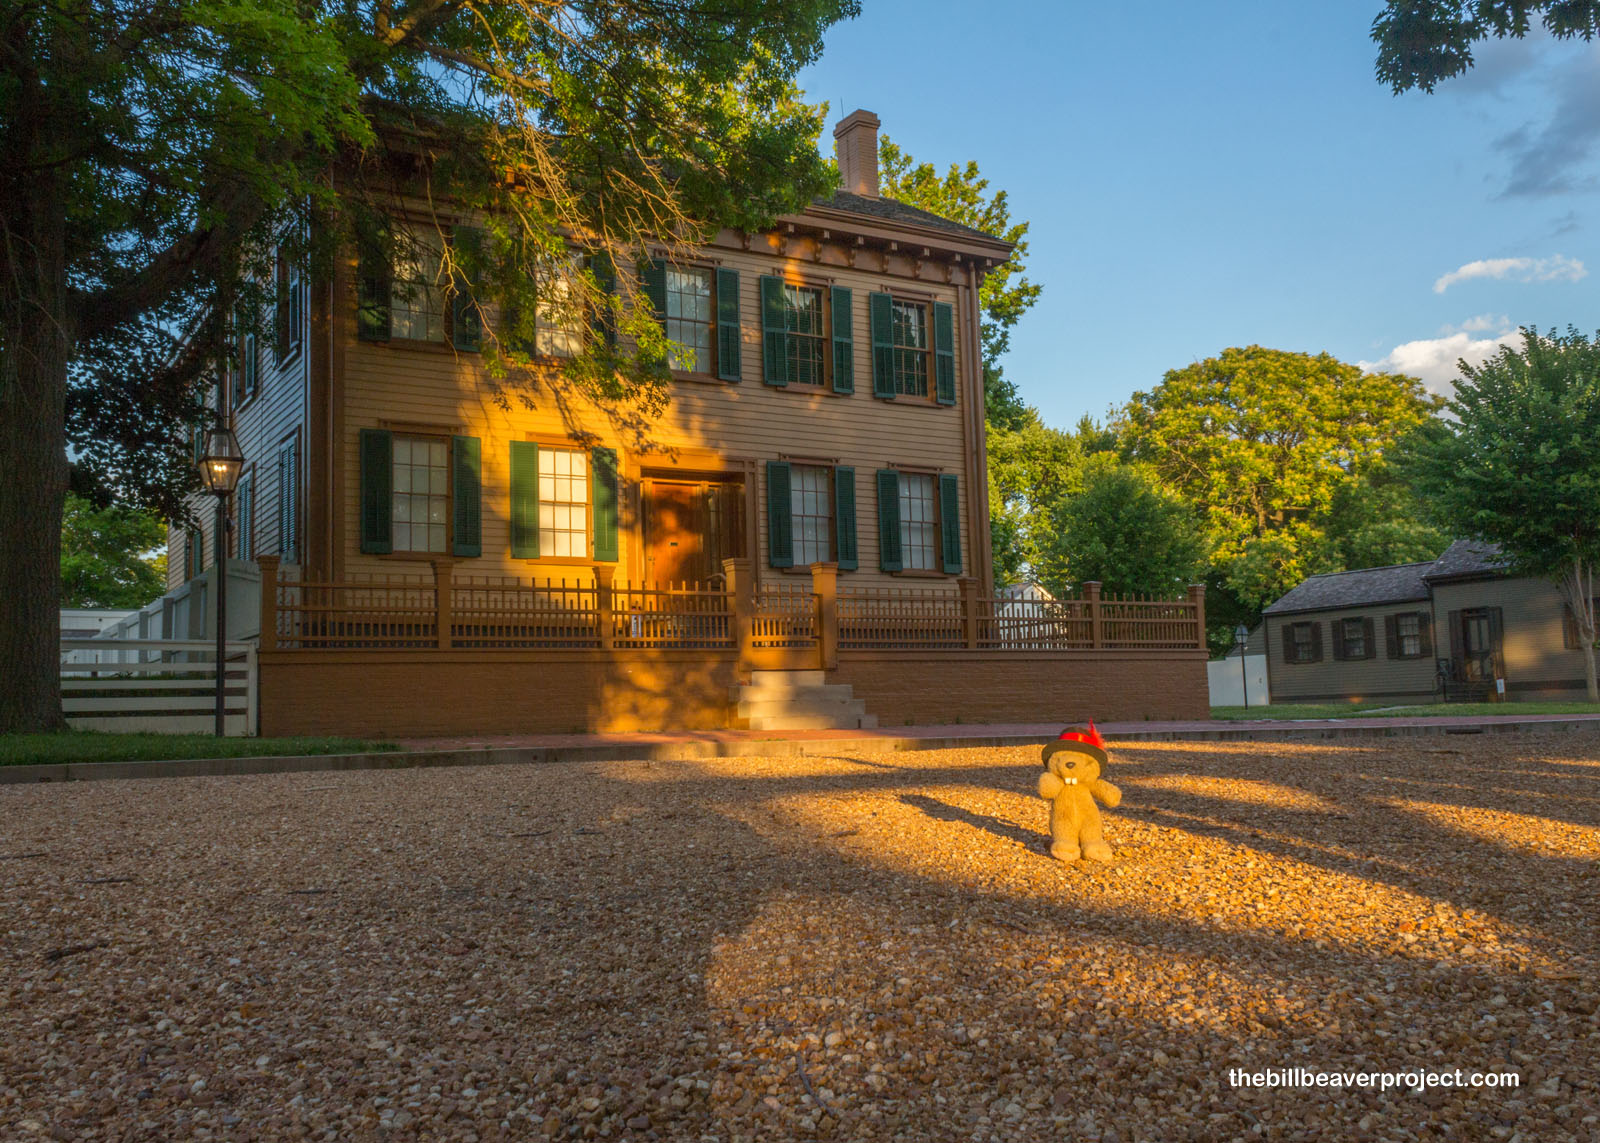 Catching the evening light on the Lincoln home!